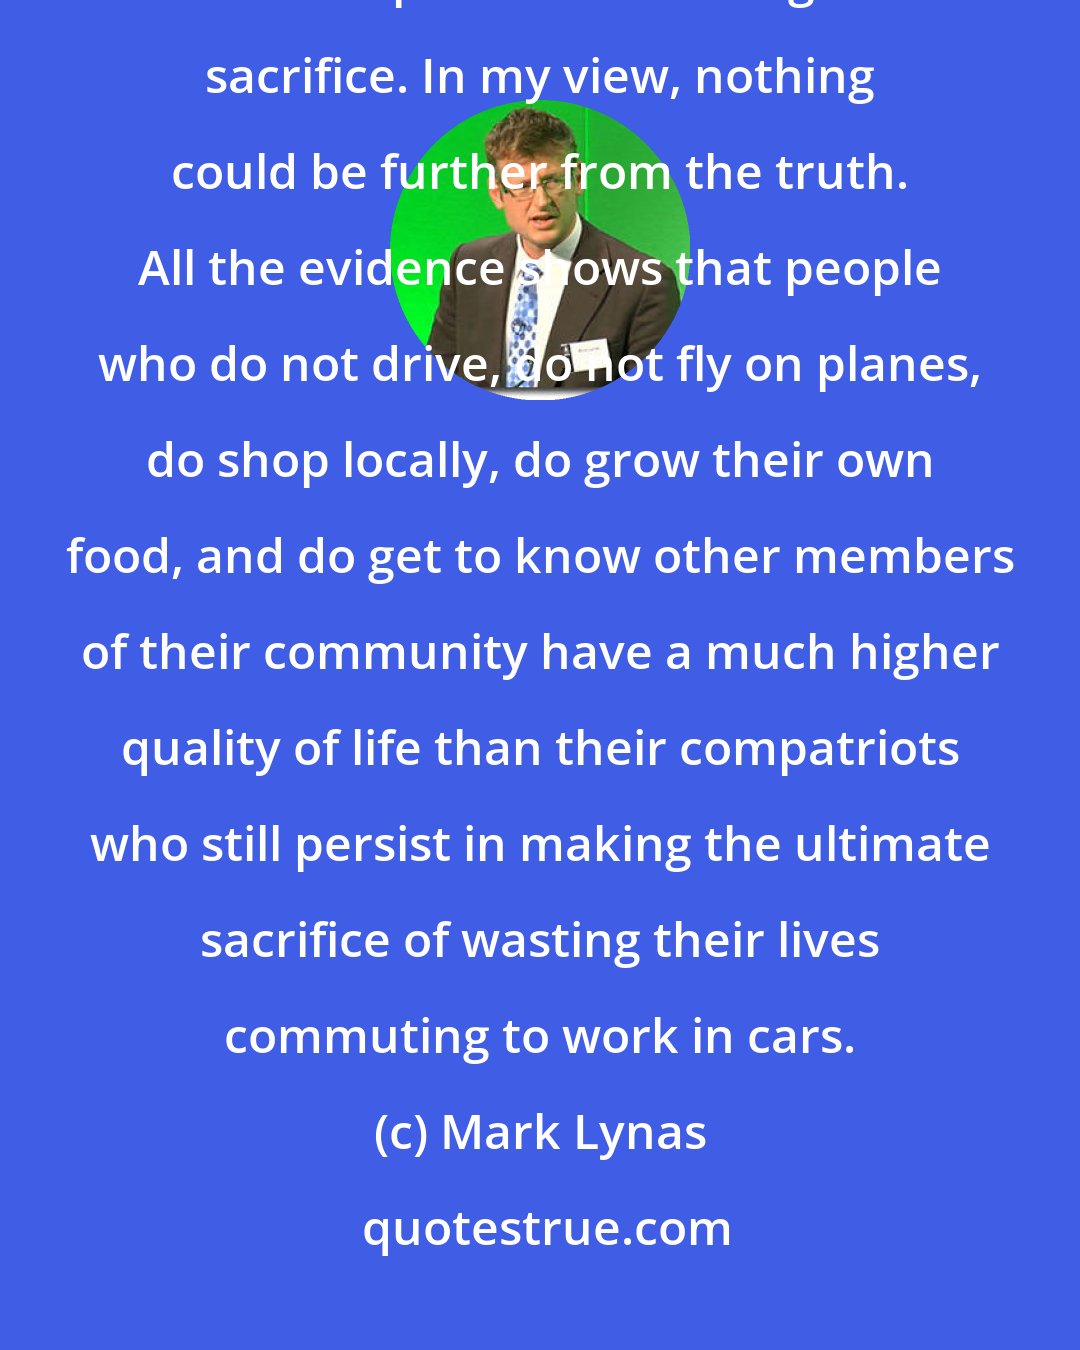 Mark Lynas: An outdated view still prevails that a low-carbon lifestyle requires immense personal suffering and sacrifice. In my view, nothing could be further from the truth. All the evidence shows that people who do not drive, do not fly on planes, do shop locally, do grow their own food, and do get to know other members of their community have a much higher quality of life than their compatriots who still persist in making the ultimate sacrifice of wasting their lives commuting to work in cars.